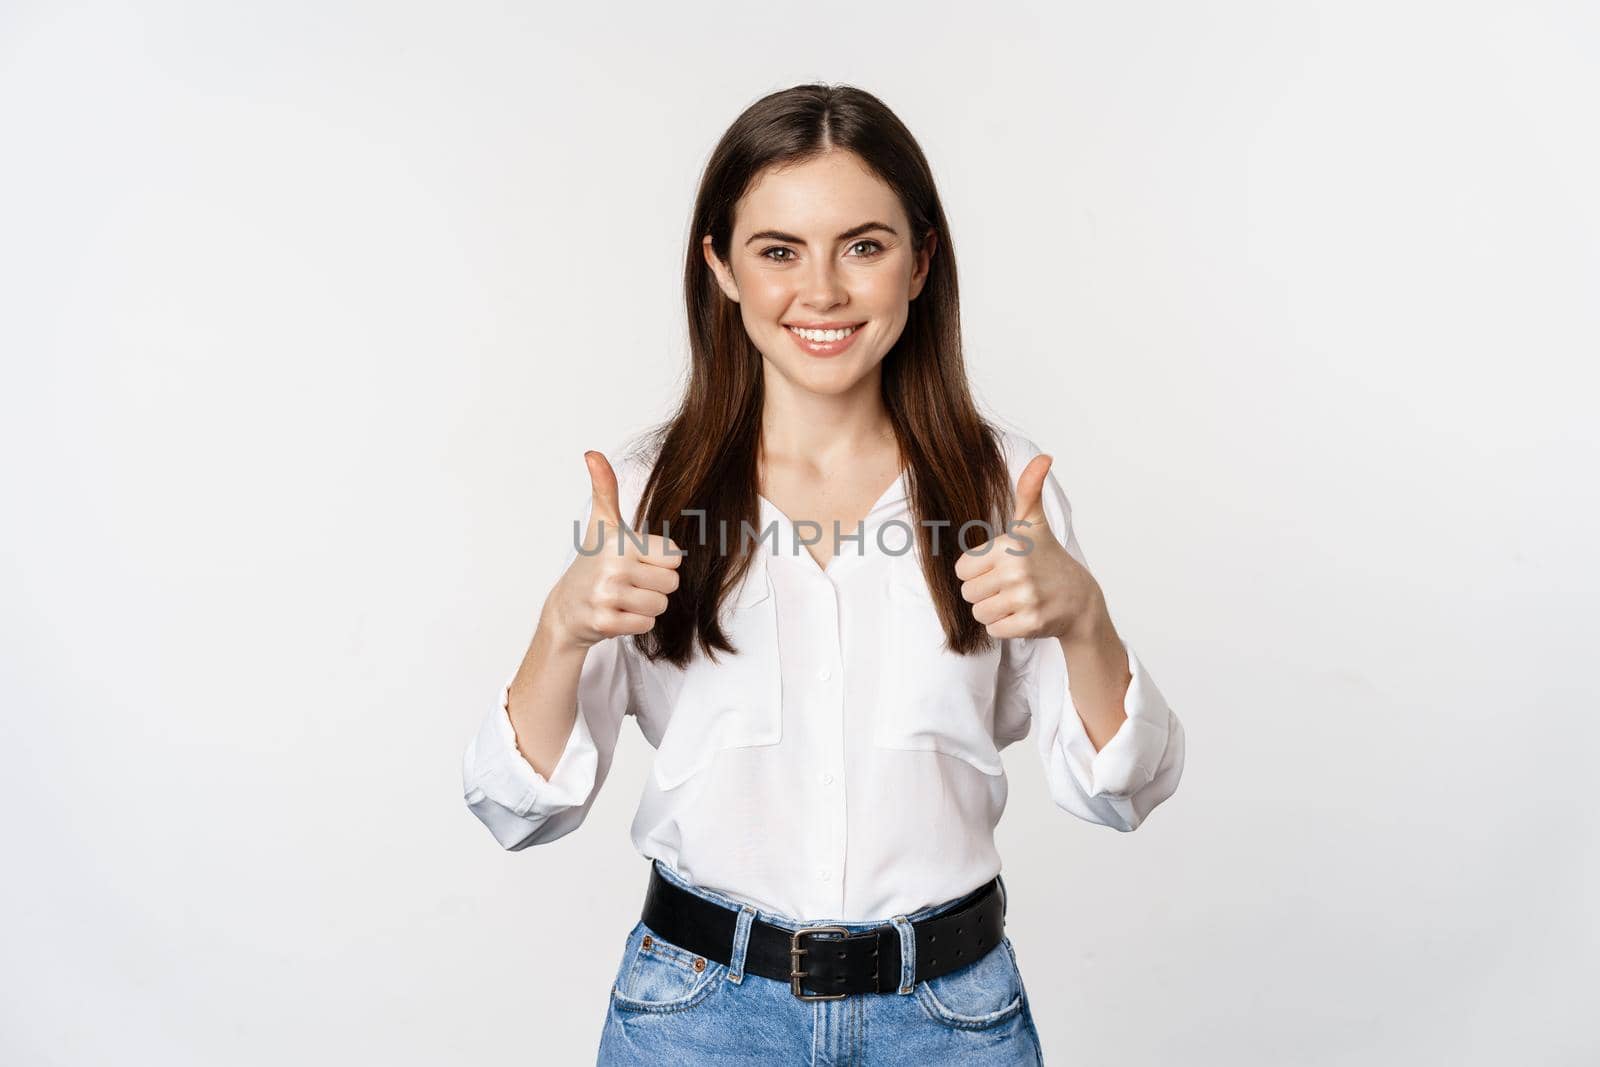 Happy smiling girl showing thumbs up, student with satisfied feedback, recommending smth, standing over white background.